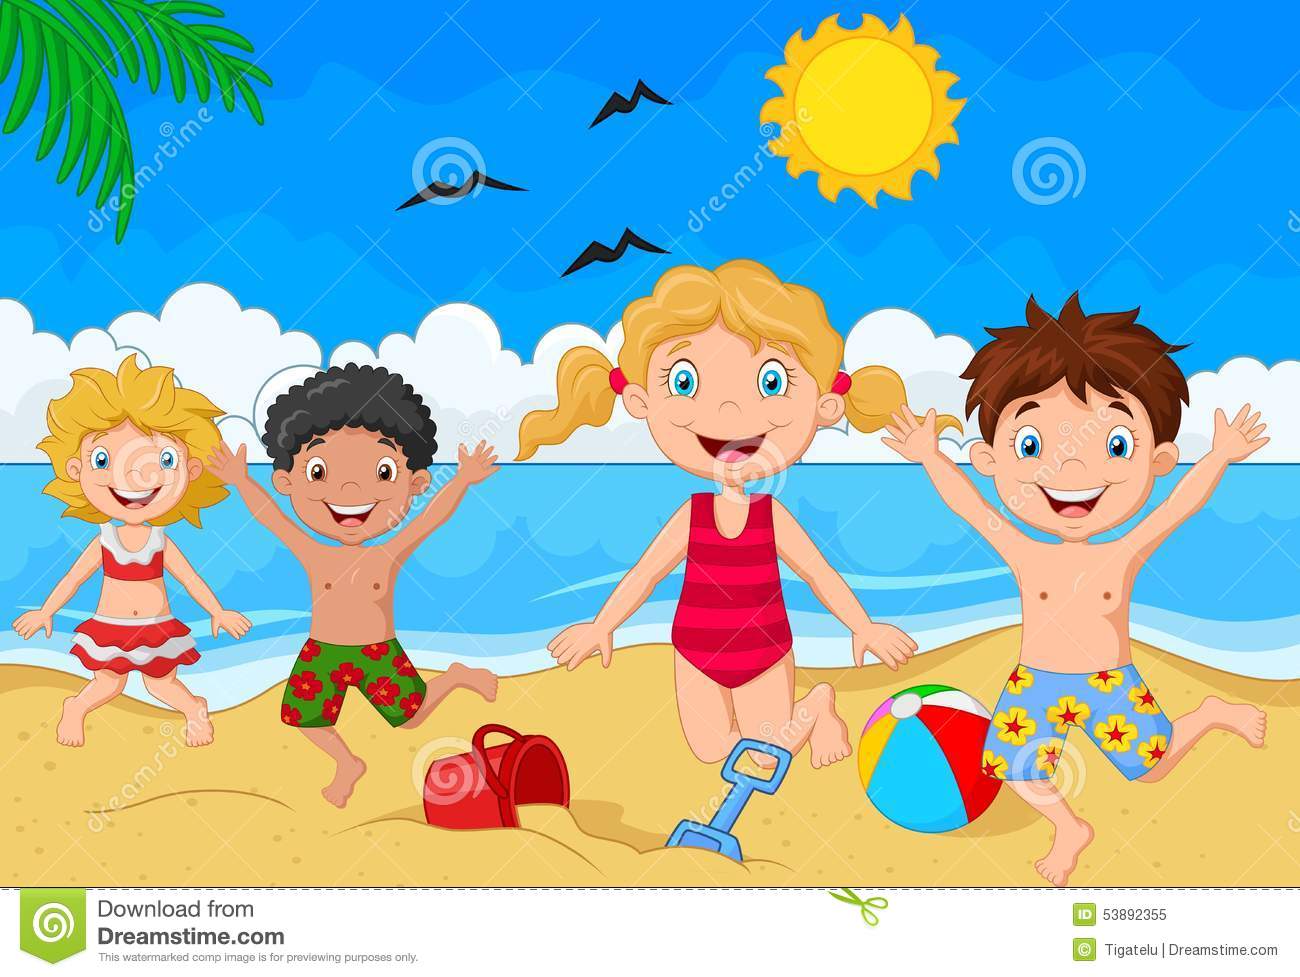 Cartoon Summer Pictures Group with 79+ items.